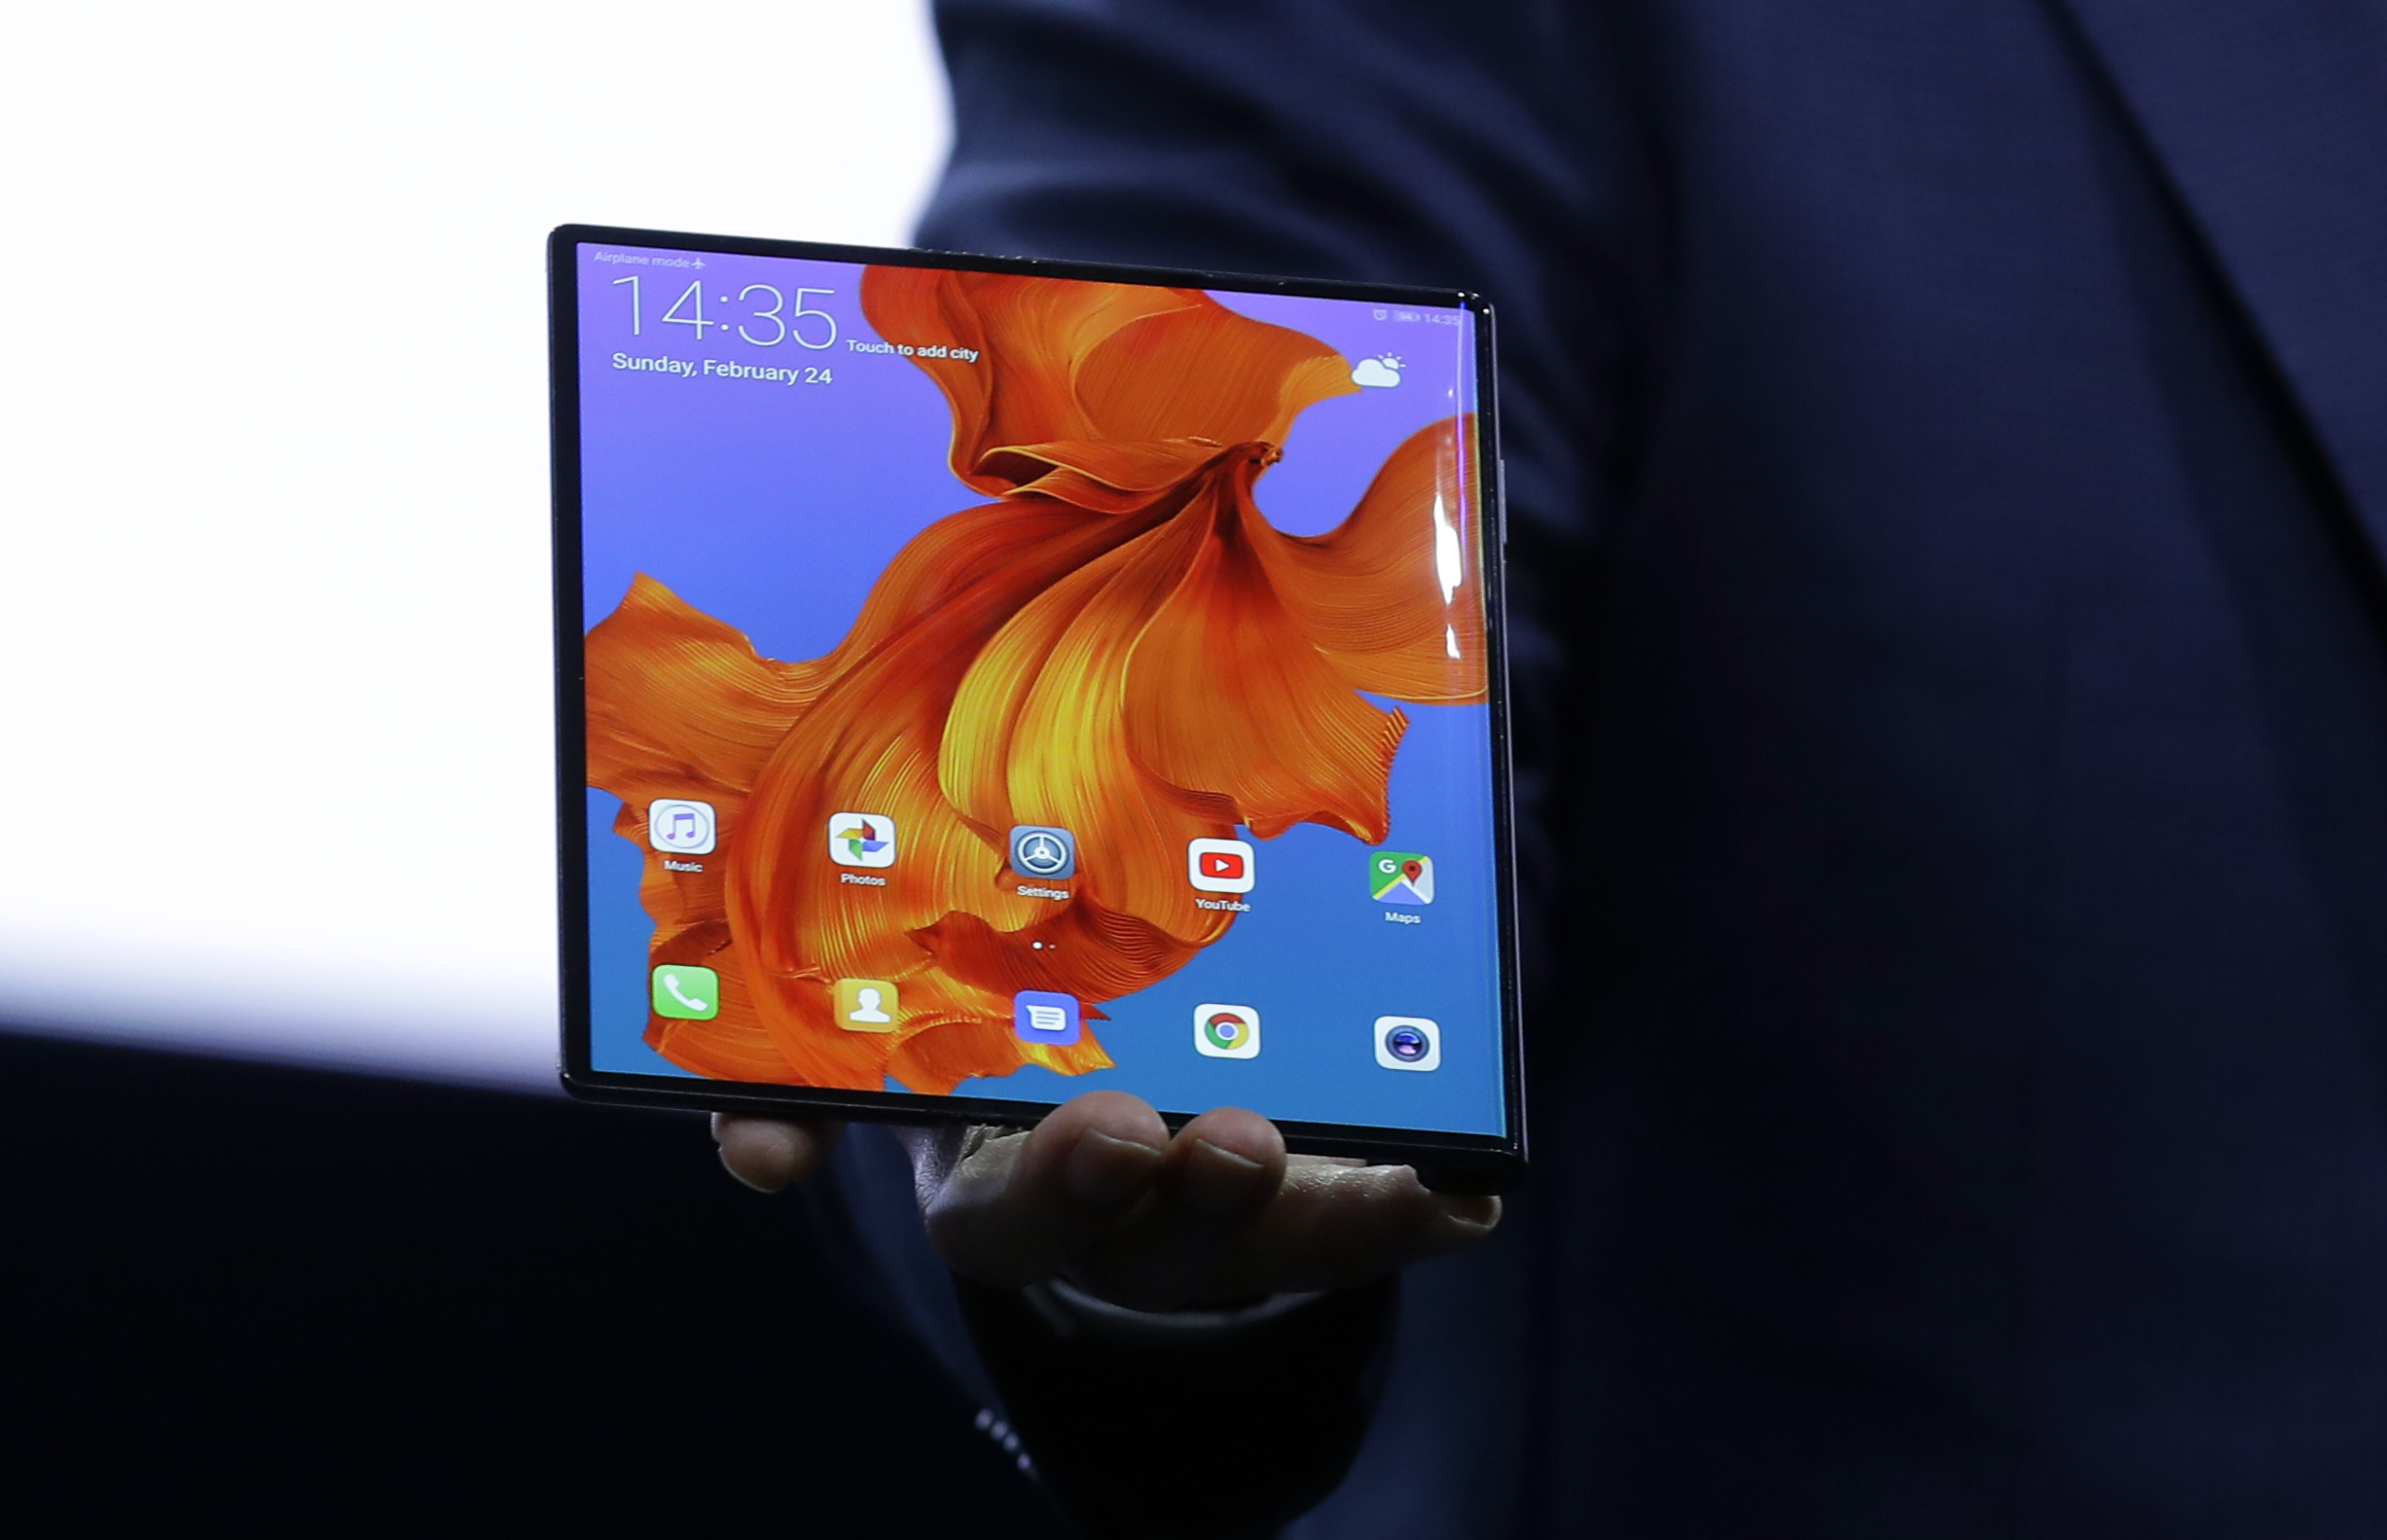 jammer nut key missing , China’s Huawei Unveils 5G Phone with Folding Screen